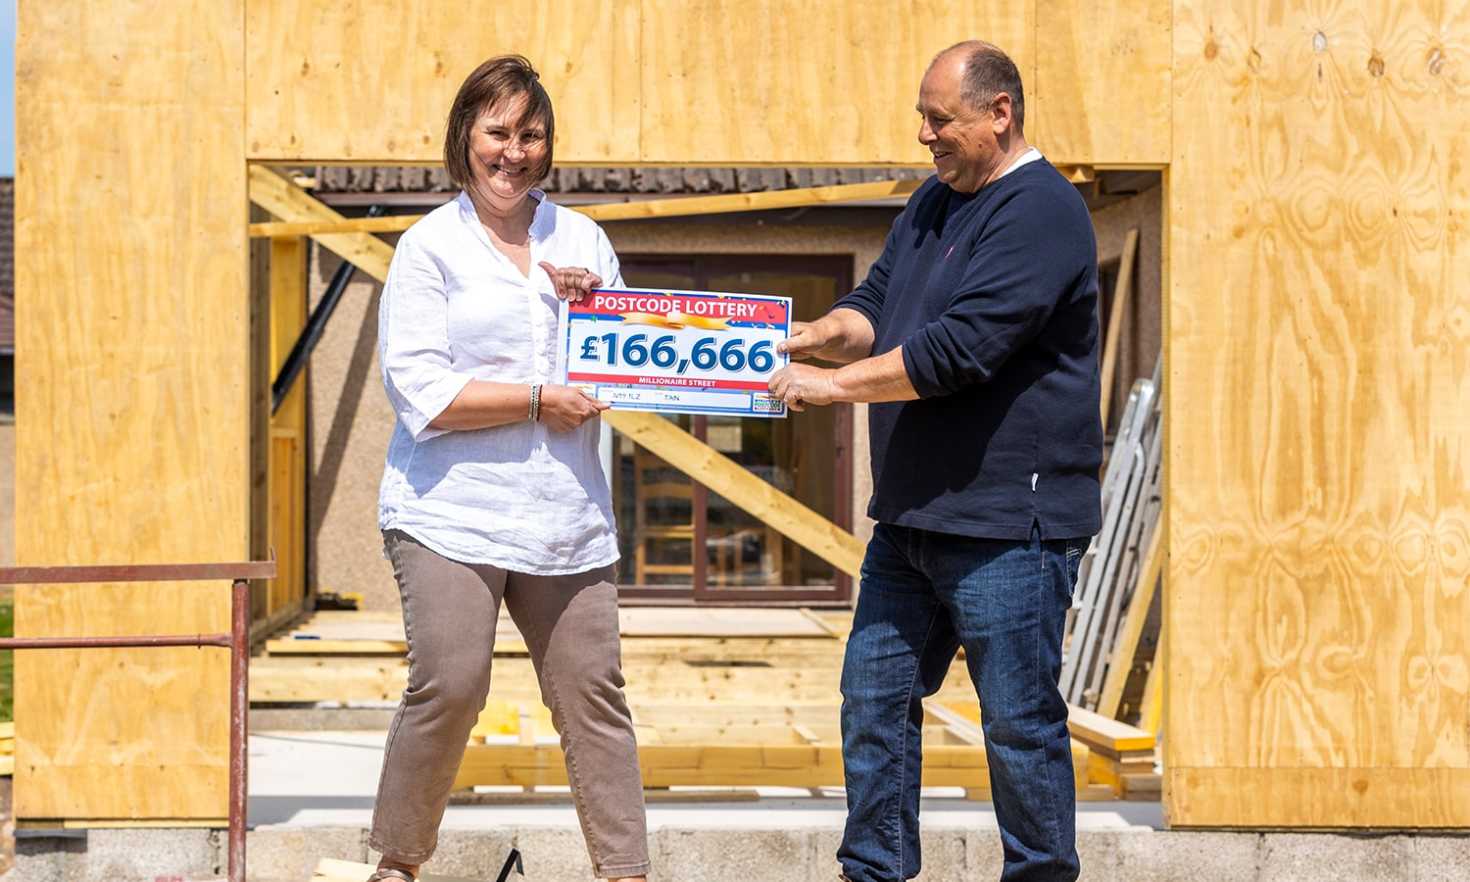 Previous winner Angela was set to complete a new kitchen after winning £166,666